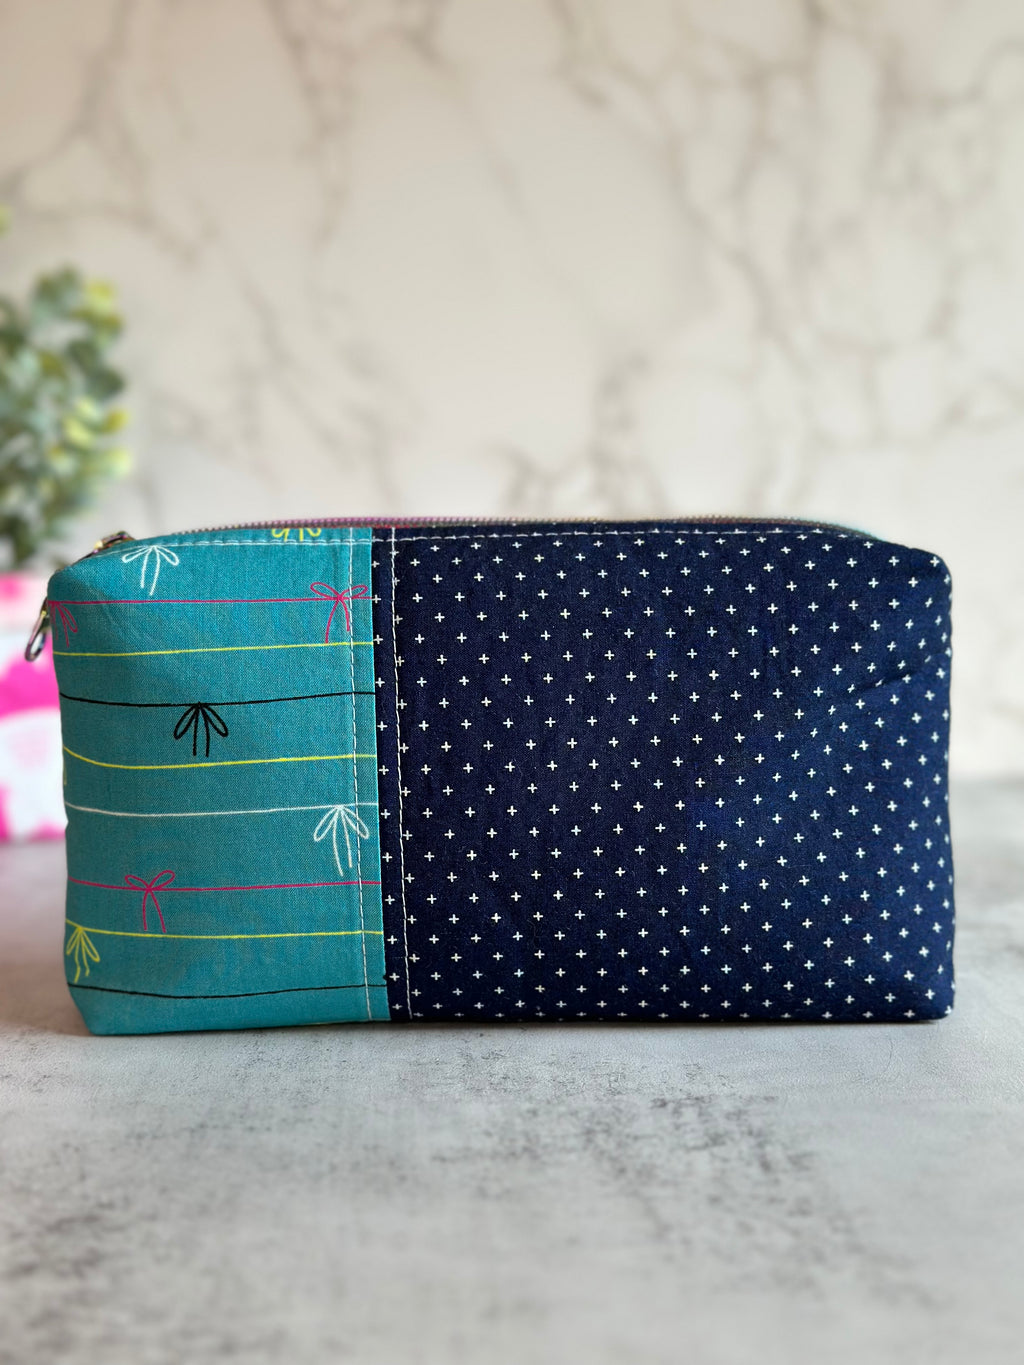 Boxy Pouch - Ribbons in Teal